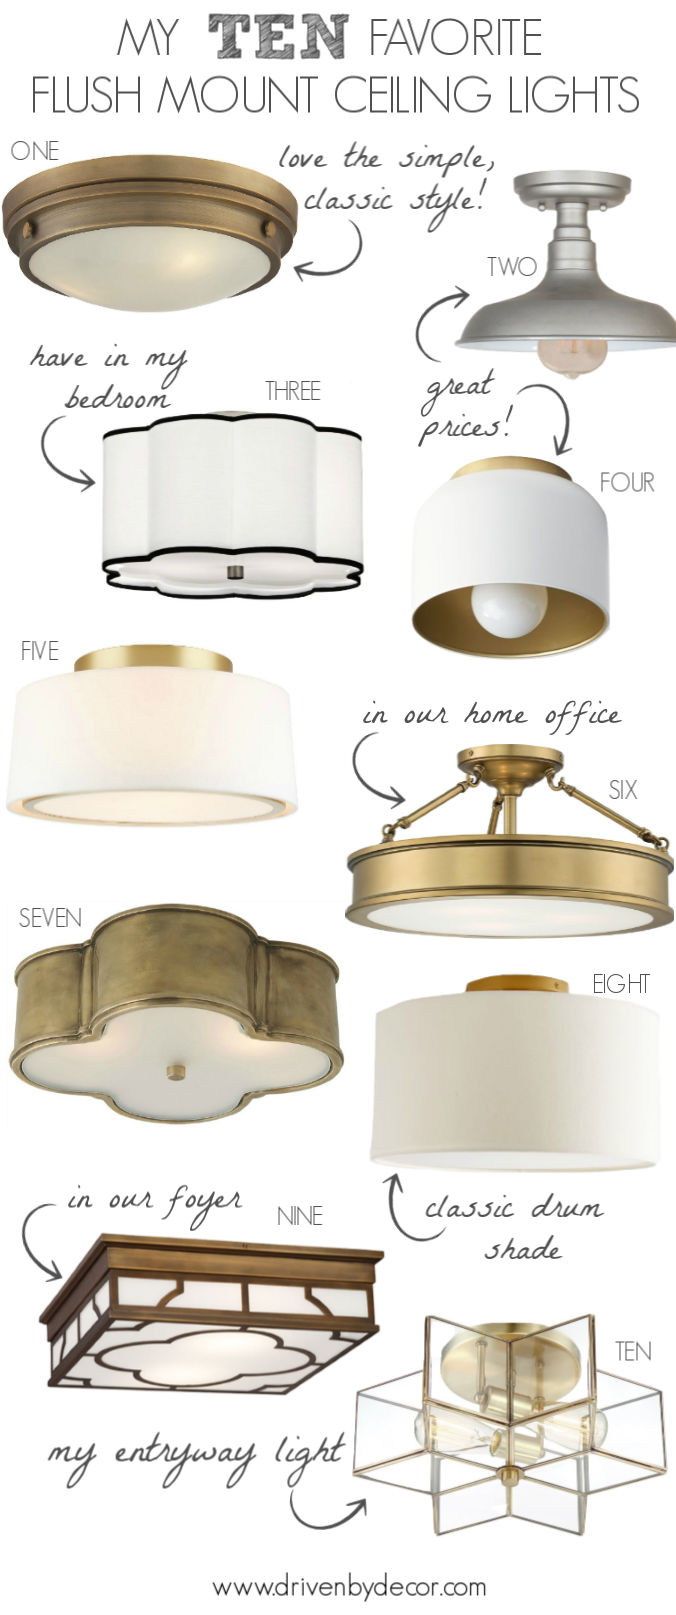 My flush mount lighting favorites including many I have in my own home!